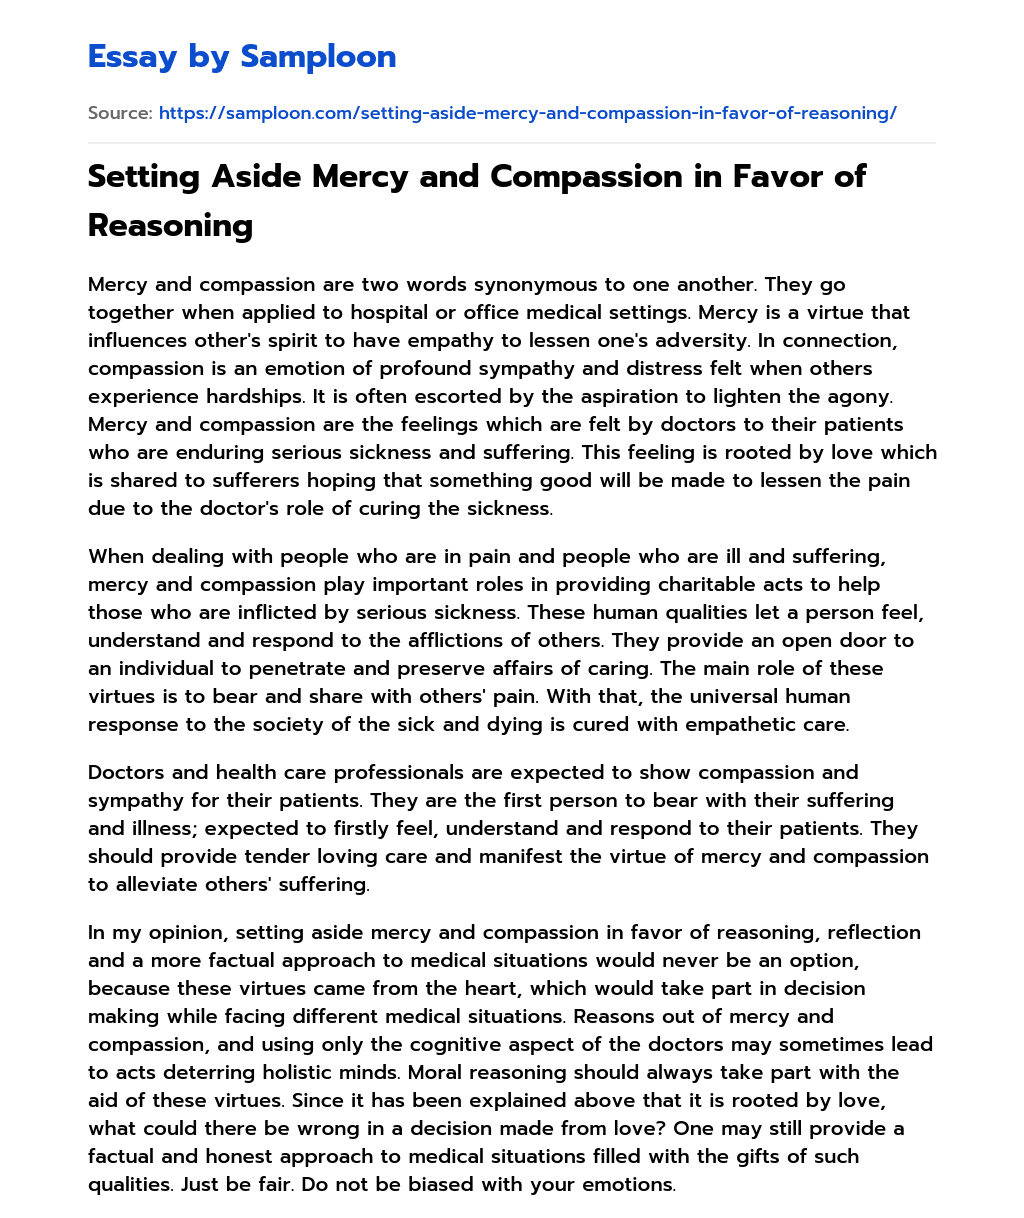 Setting Aside Mercy and Compassion in Favor of Reasoning essay